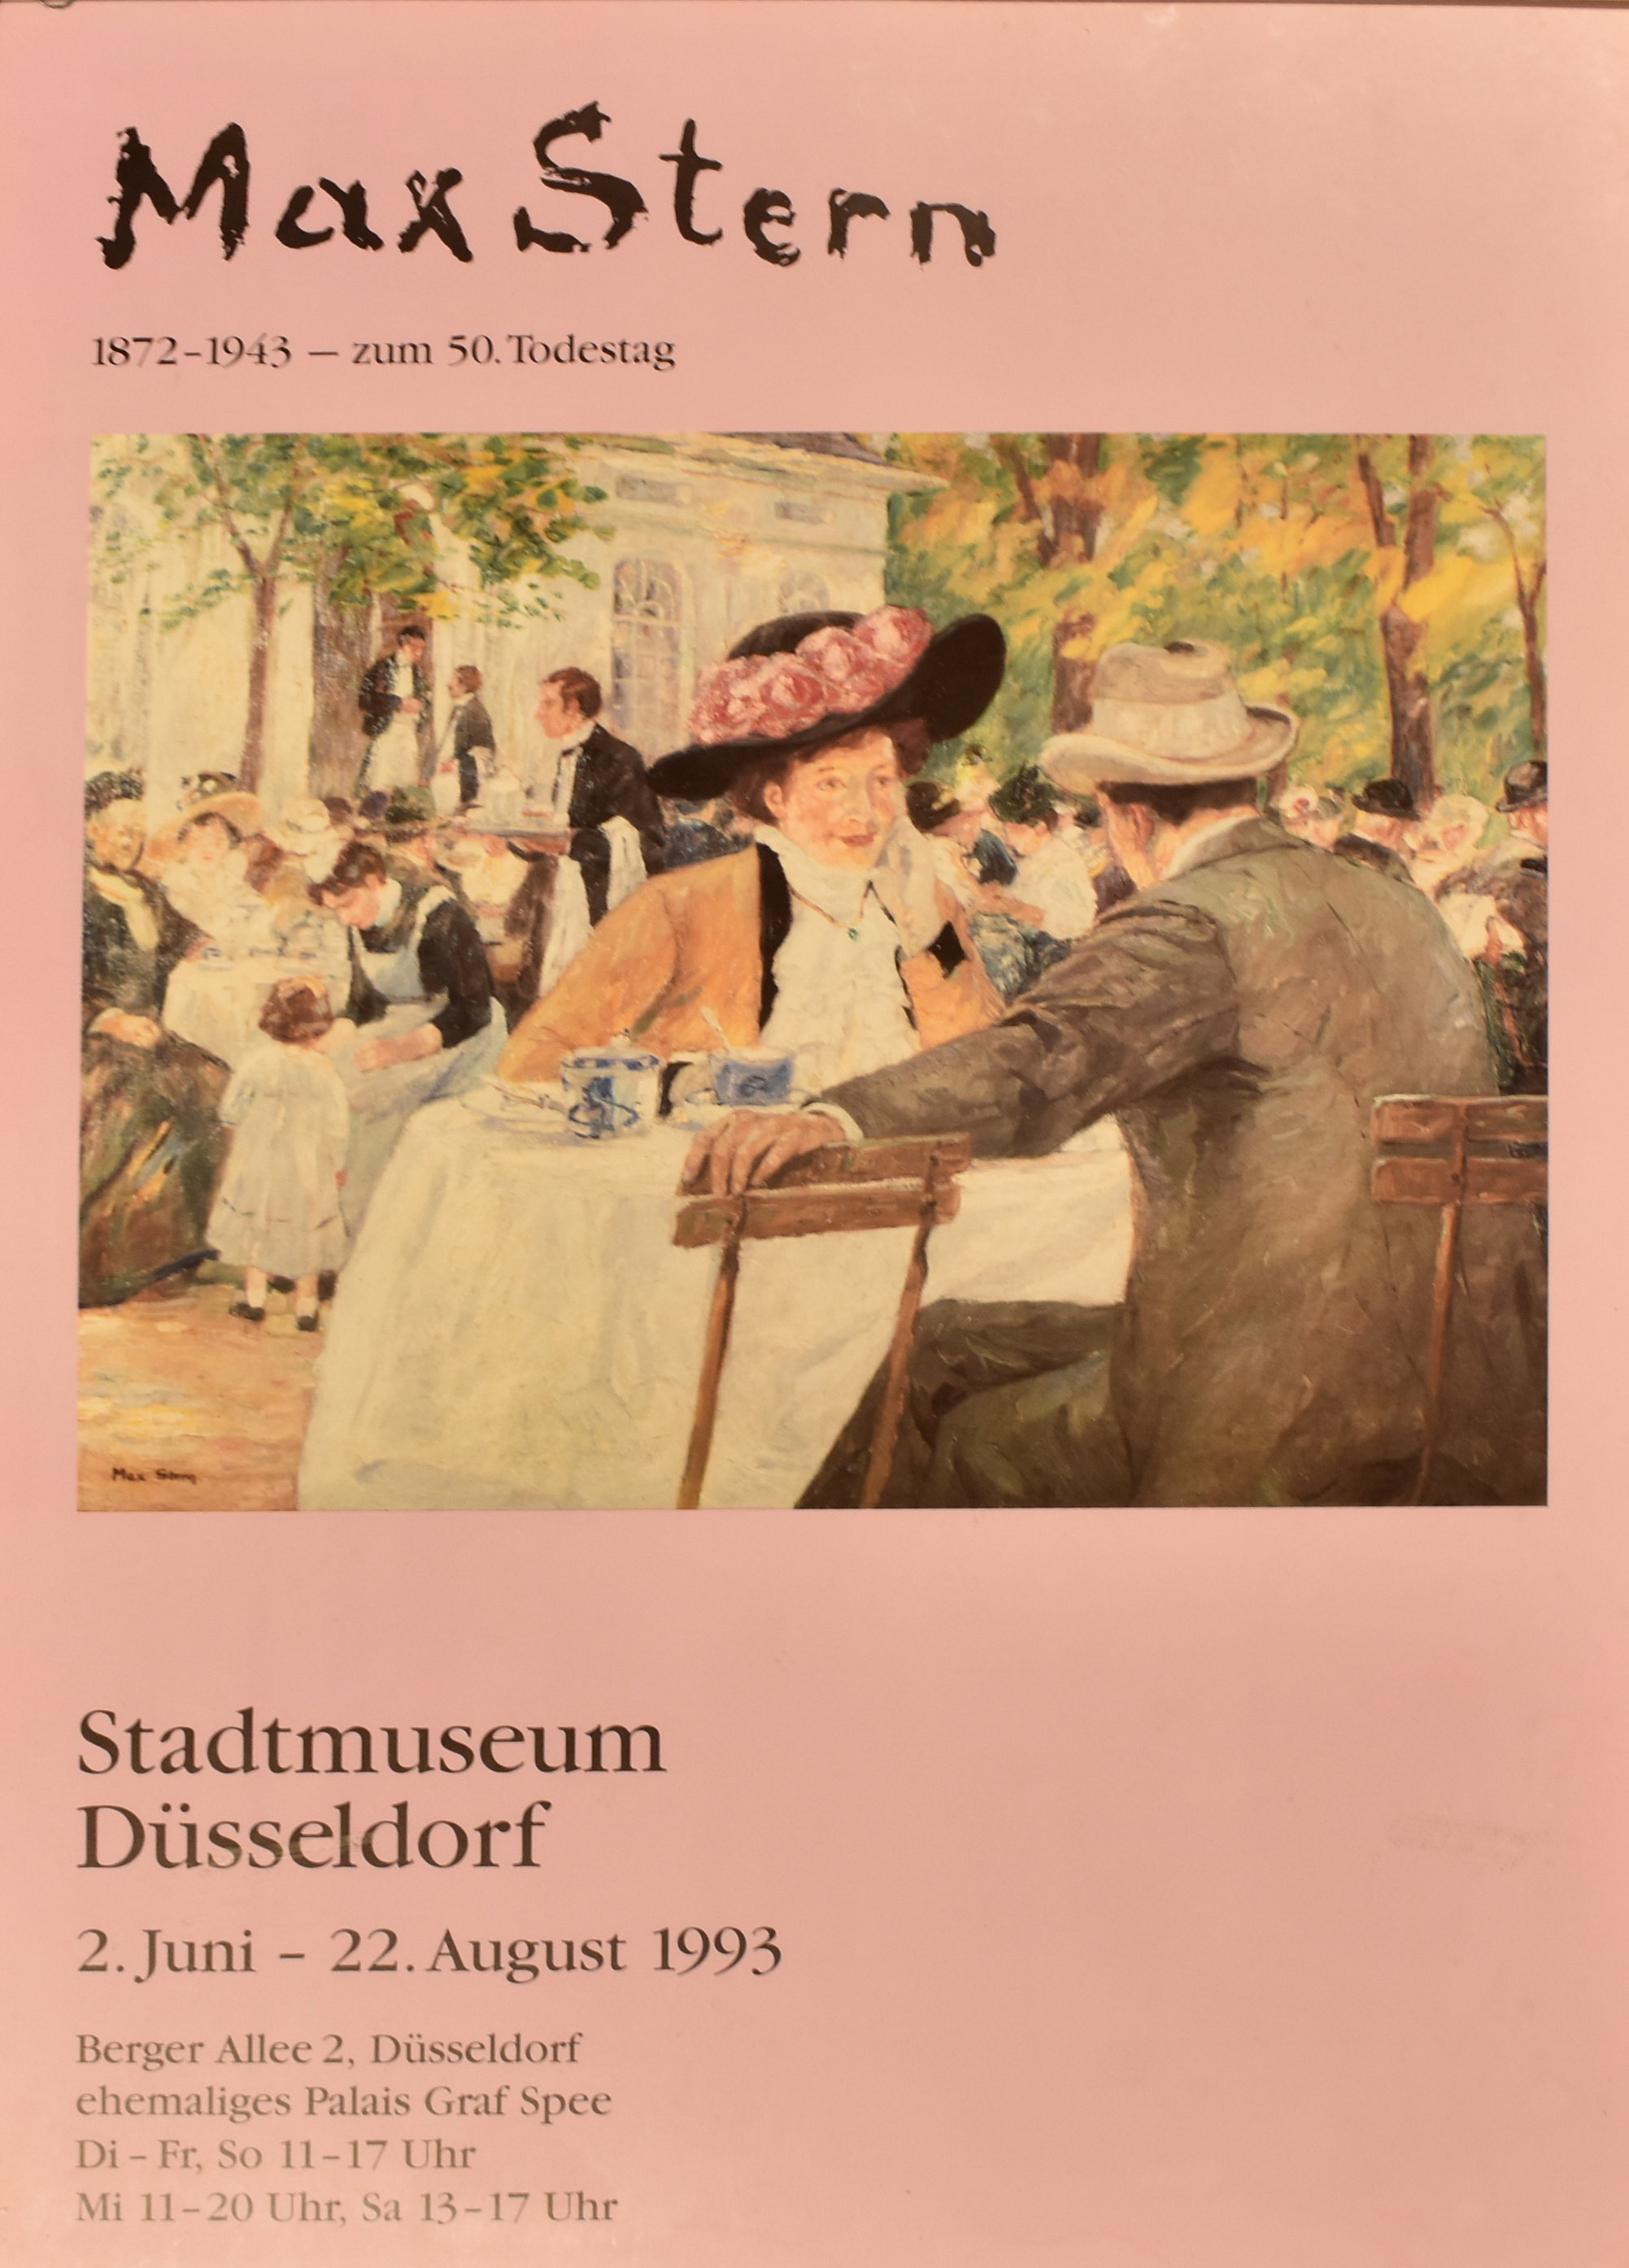 MAX STERN - 1993 STADTMUSEUM DUSSELDORF EXHIBITION POSTER - Image 2 of 4